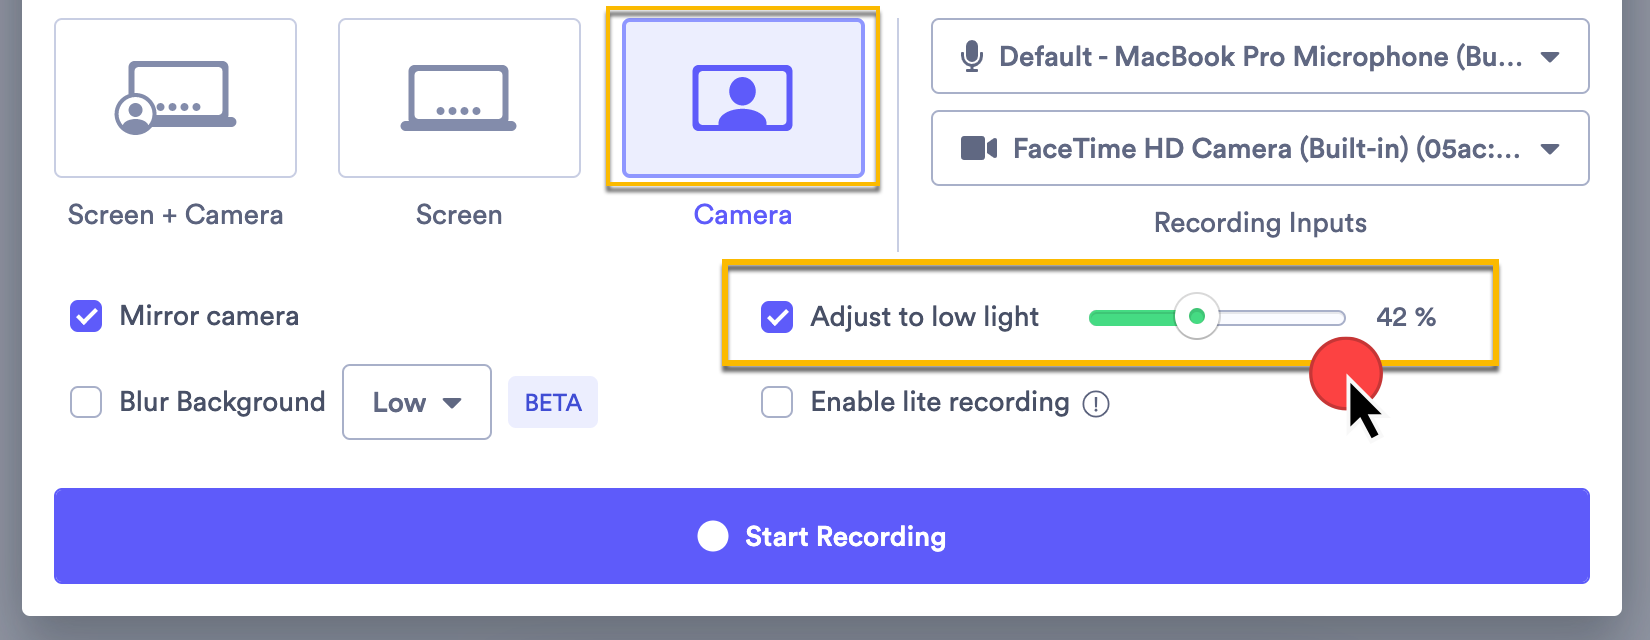 Selecting the Camera recording option, then using the checkbox to enable Adjust to low light